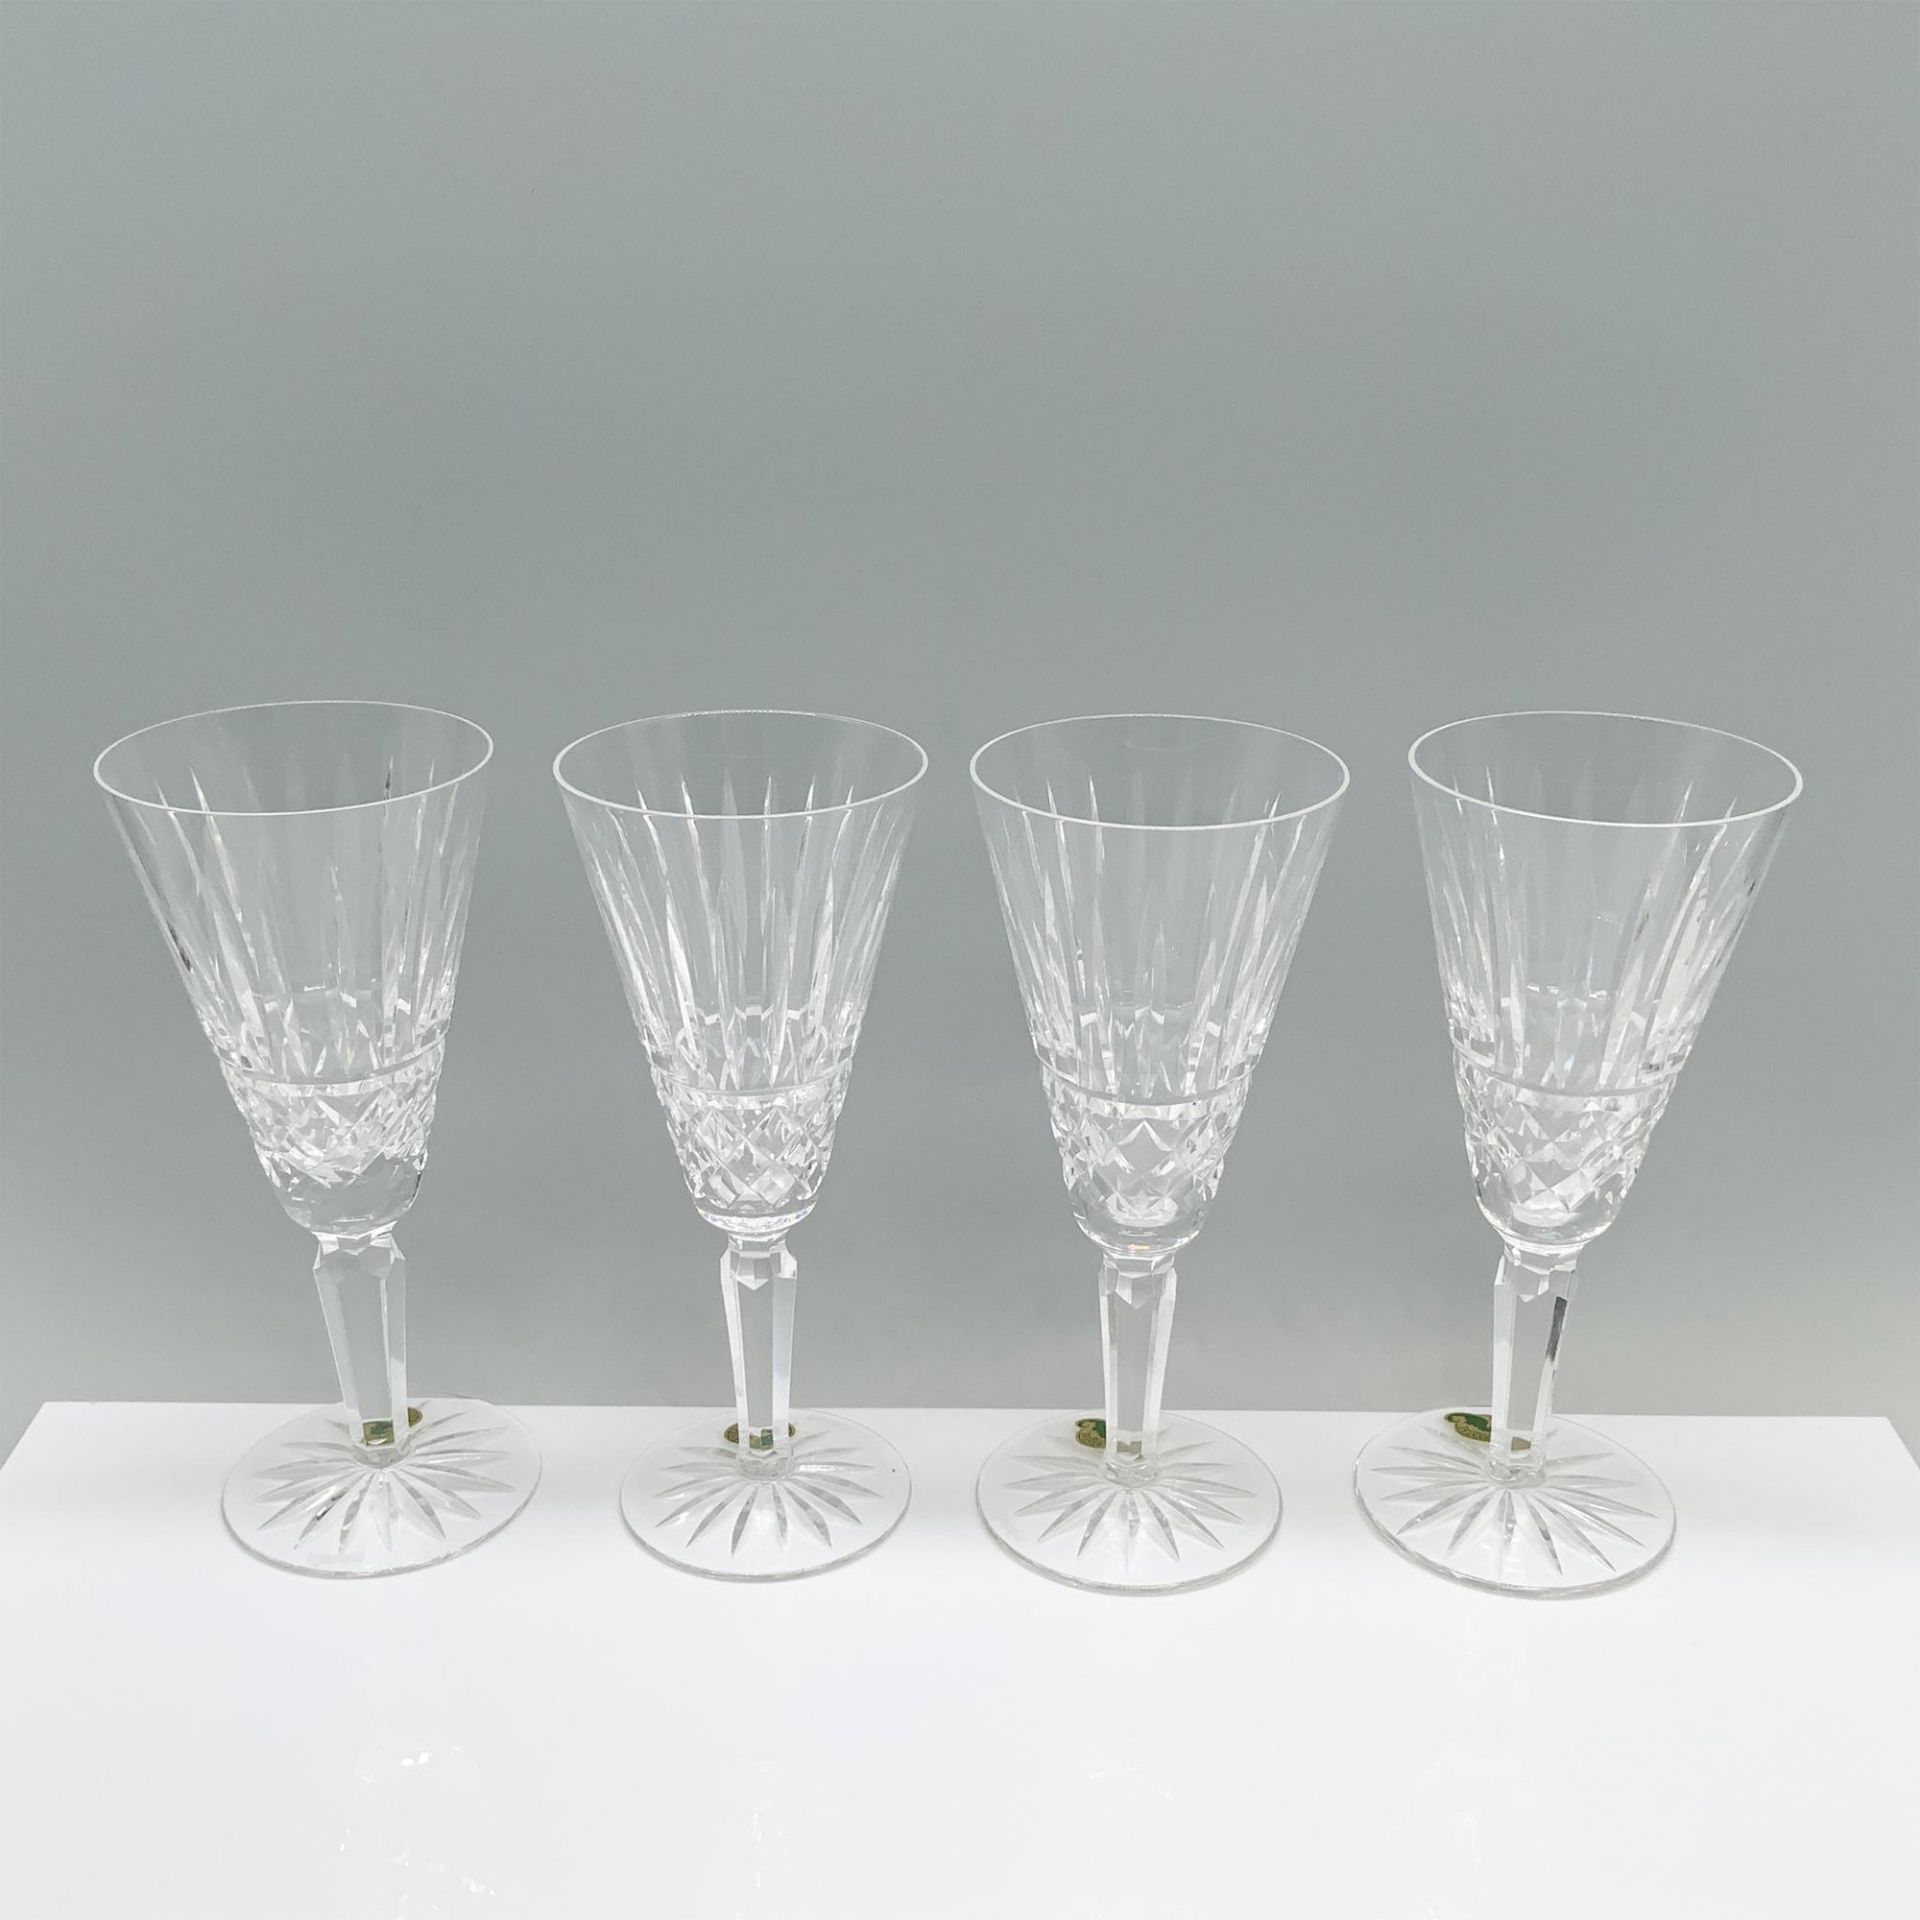 4pc Waterford Crystal Flute Champagne Glasses, Maeve - Image 2 of 4